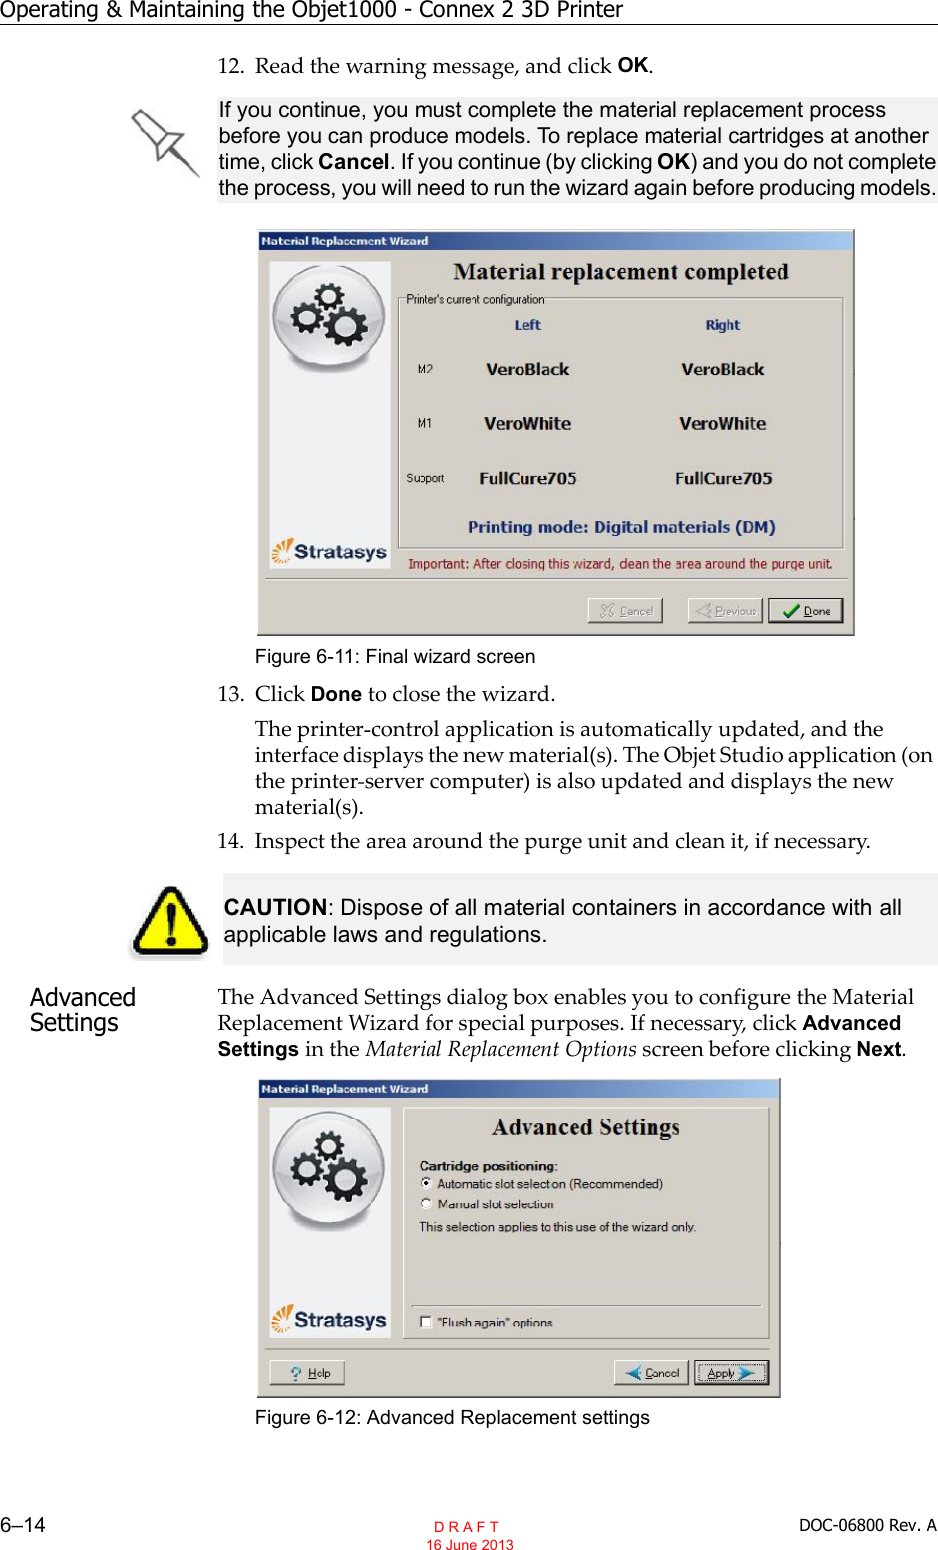 Operating &amp; Maintaining the Objet1000 - Connex 2 3D Printer6–14 DOC-06800 Rev. A12. Read the warning message, and click OK.Figure 6-11: Final wizard screen13. Click Done to close the wizard.The printer control application is automatically updated, and theinterface displays the new material(s). The Objet Studio application (onthe printer server computer) is also updated and displays the newmaterial(s).14. Inspect the area around the purge unit and clean it, if necessary.Advanced SettingsThe Advanced Settings dialog box enables you to configure the MaterialReplacement Wizard for special purposes. If necessary, click AdvancedSettings in the Material Replacement Options screen before clicking Next.Figure 6-12: Advanced Replacement settingsIf you continue, you must complete the material replacement process before you can produce models. To replace material cartridges at another time, click Cancel. If you continue (by clicking OK) and you do not complete the process, you will need to run the wizard again before producing models. CAUTION: Dispose of all material containers in accordance with all applicable laws and regulations.  D R A F T 16 June 2013